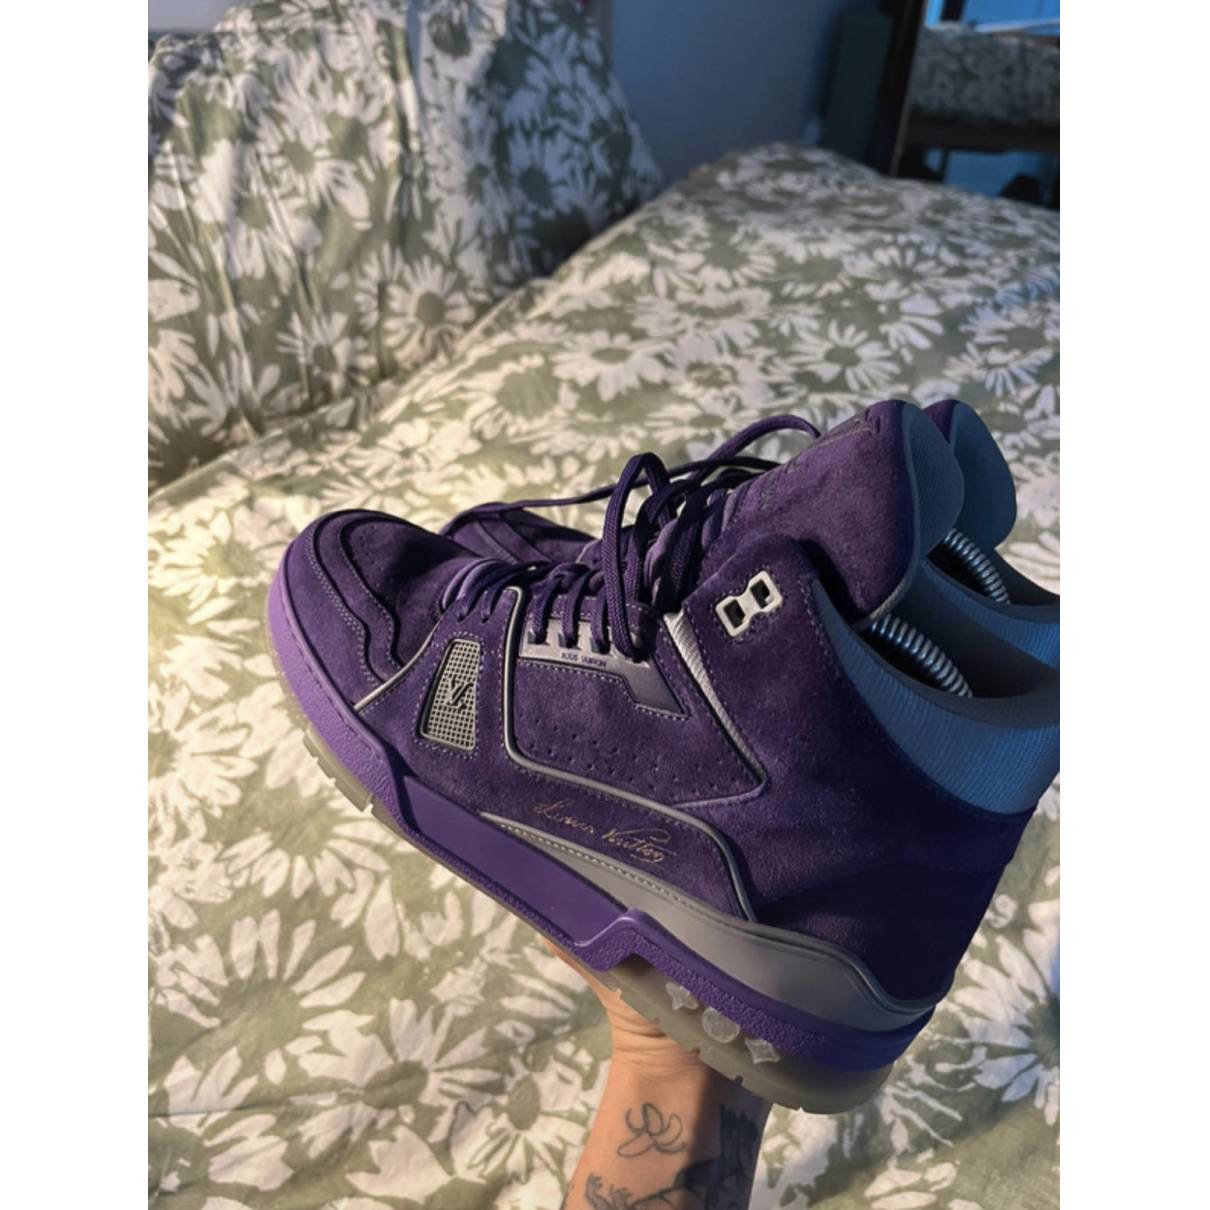 Lv trainer high trainers Louis Vuitton Purple size 6.5 US in Suede -  34854865